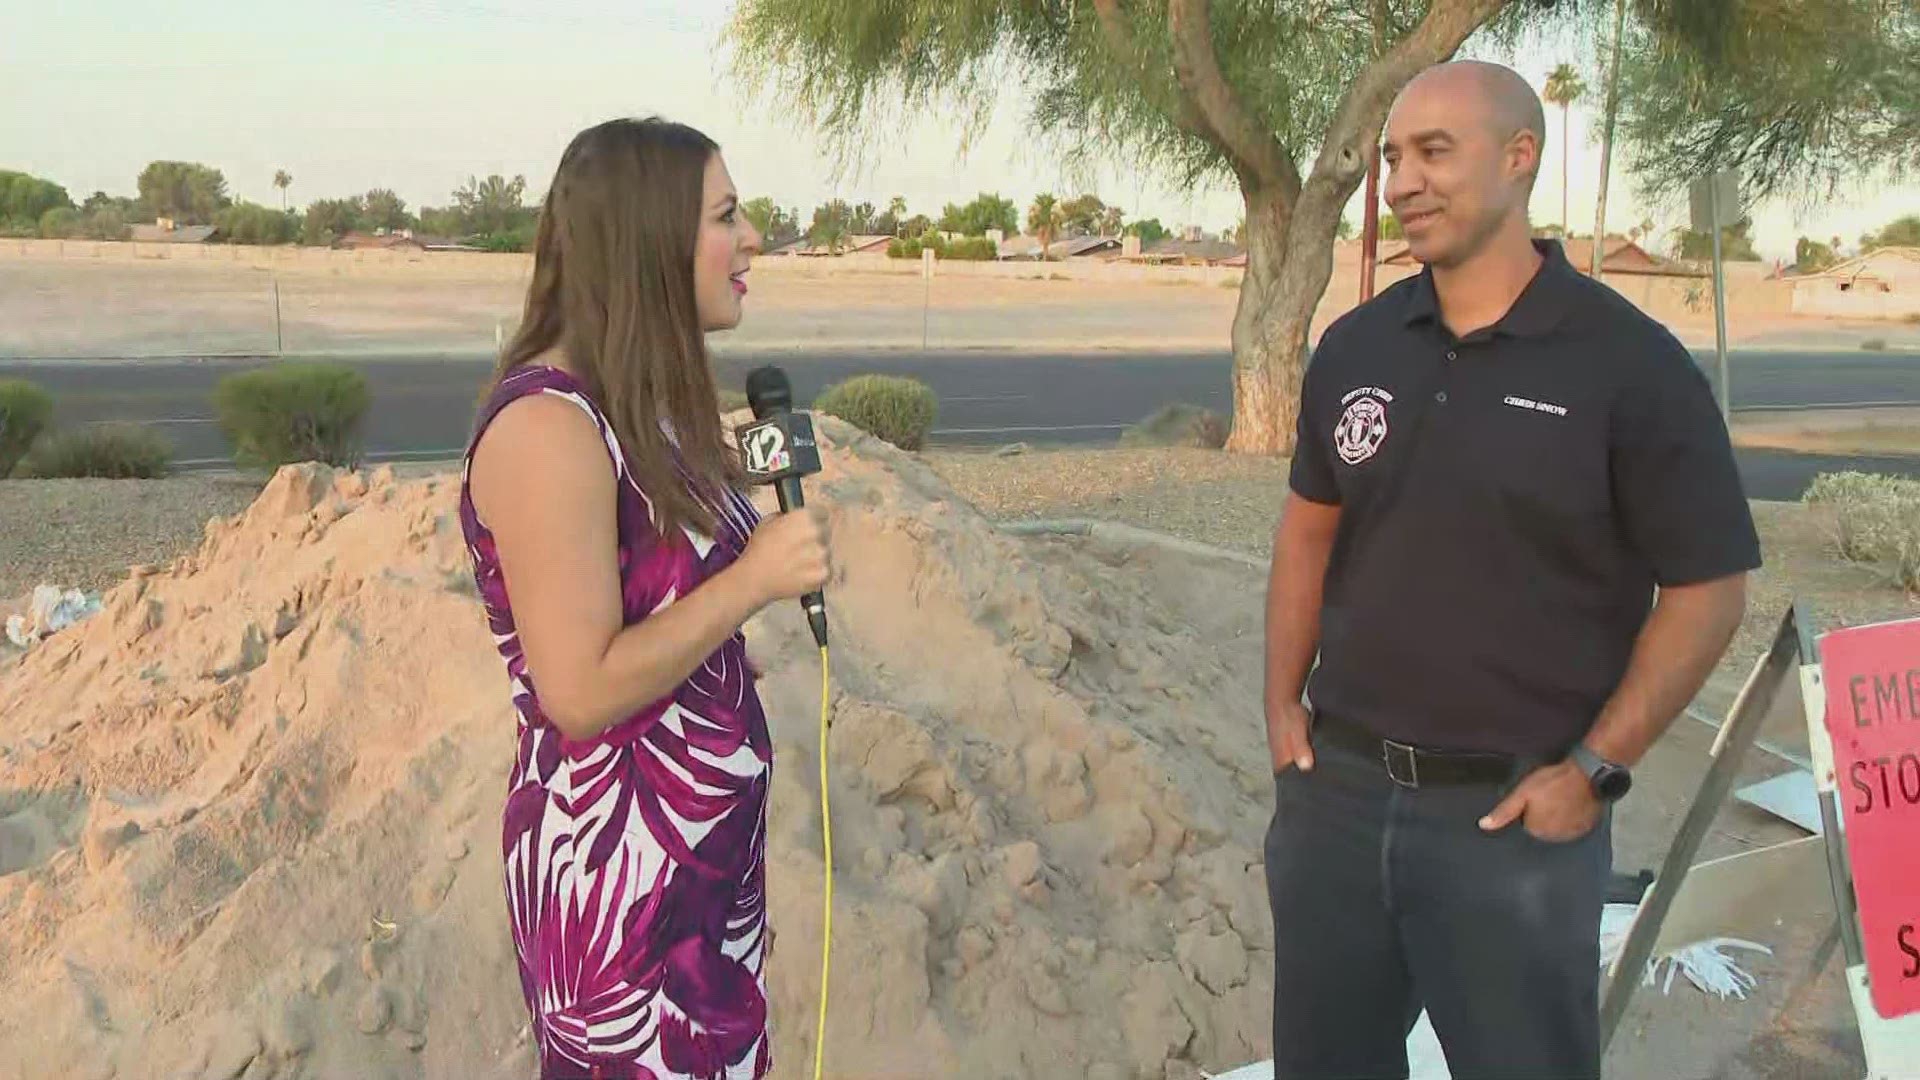 Monsoon 2021 is almost here and officials from the  City of Tempe are offering some tips to help you stay safe this year. Erica Stapleton has the details.